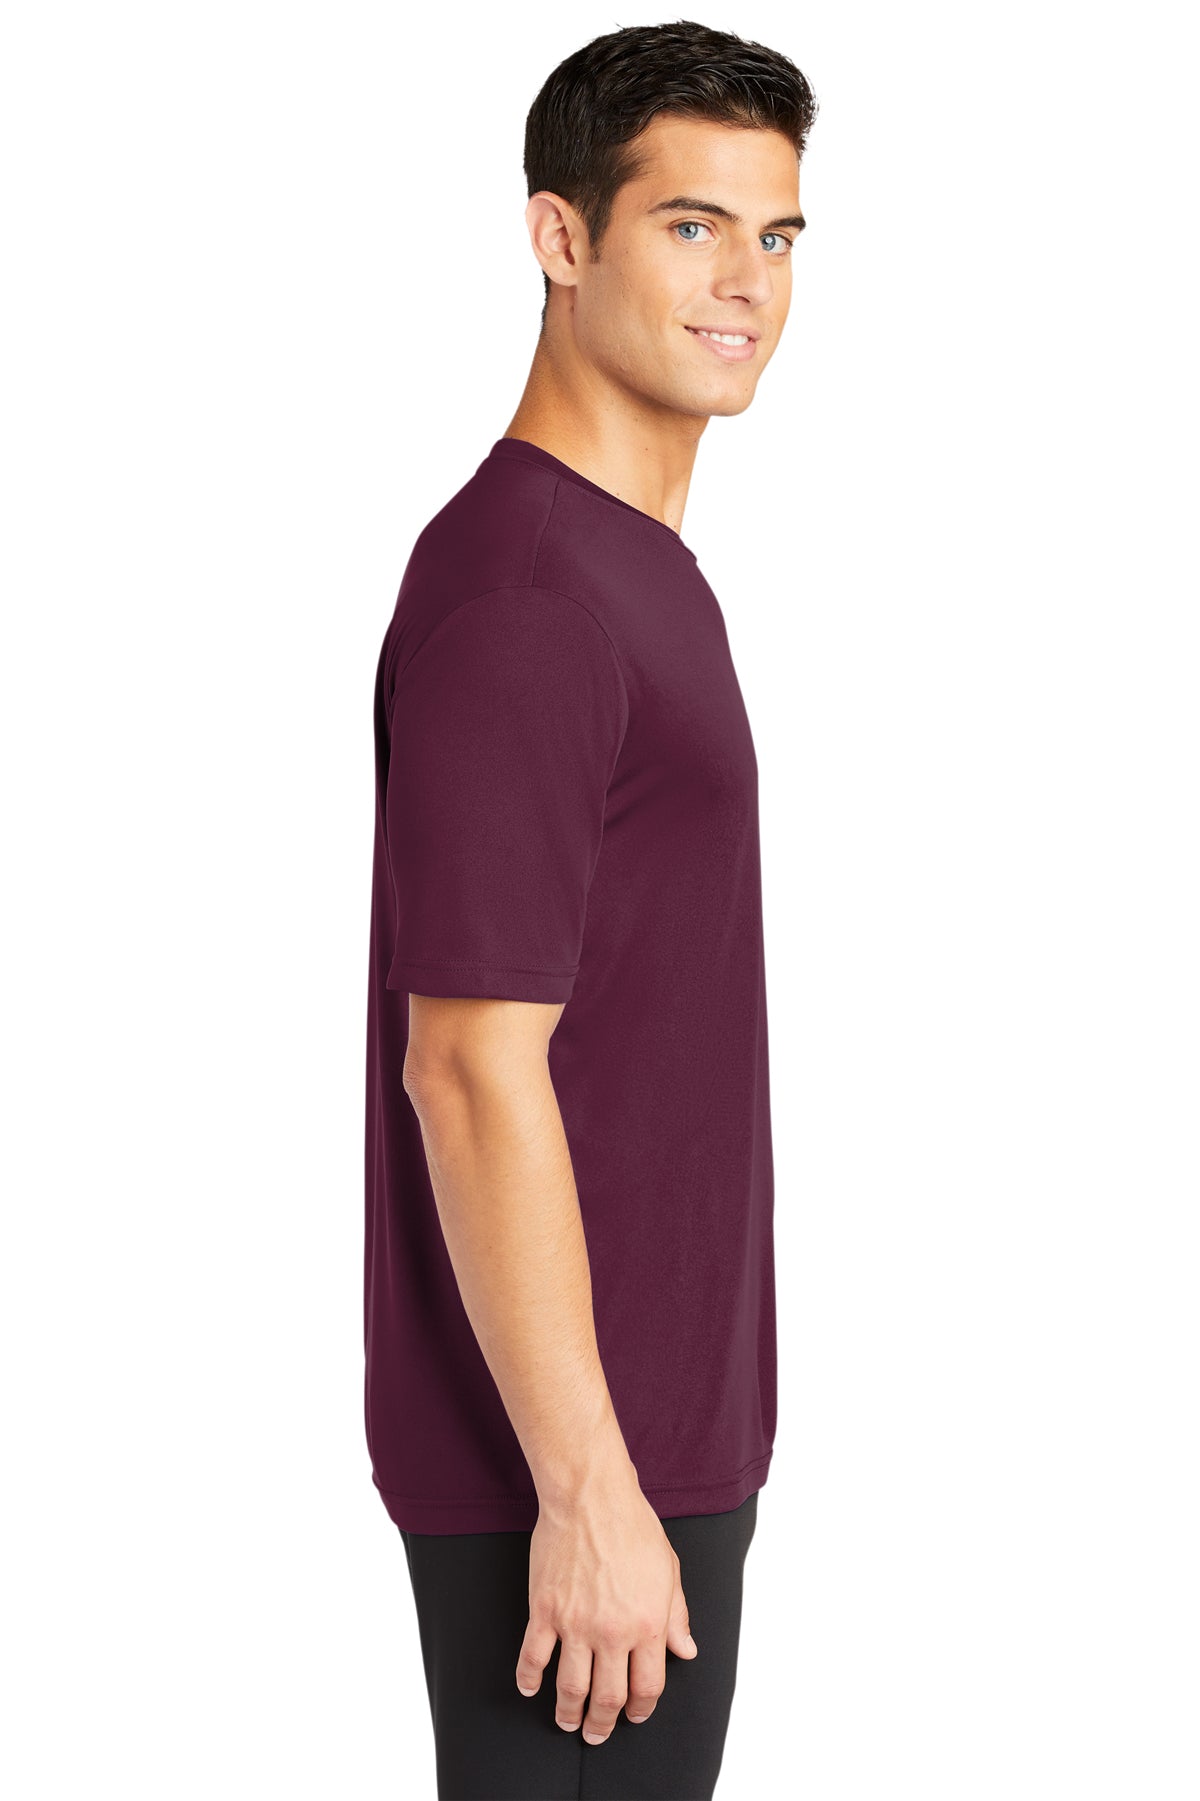 Sport-Tek Tall PosiCharge Customized Competitor Tee's, Maroon